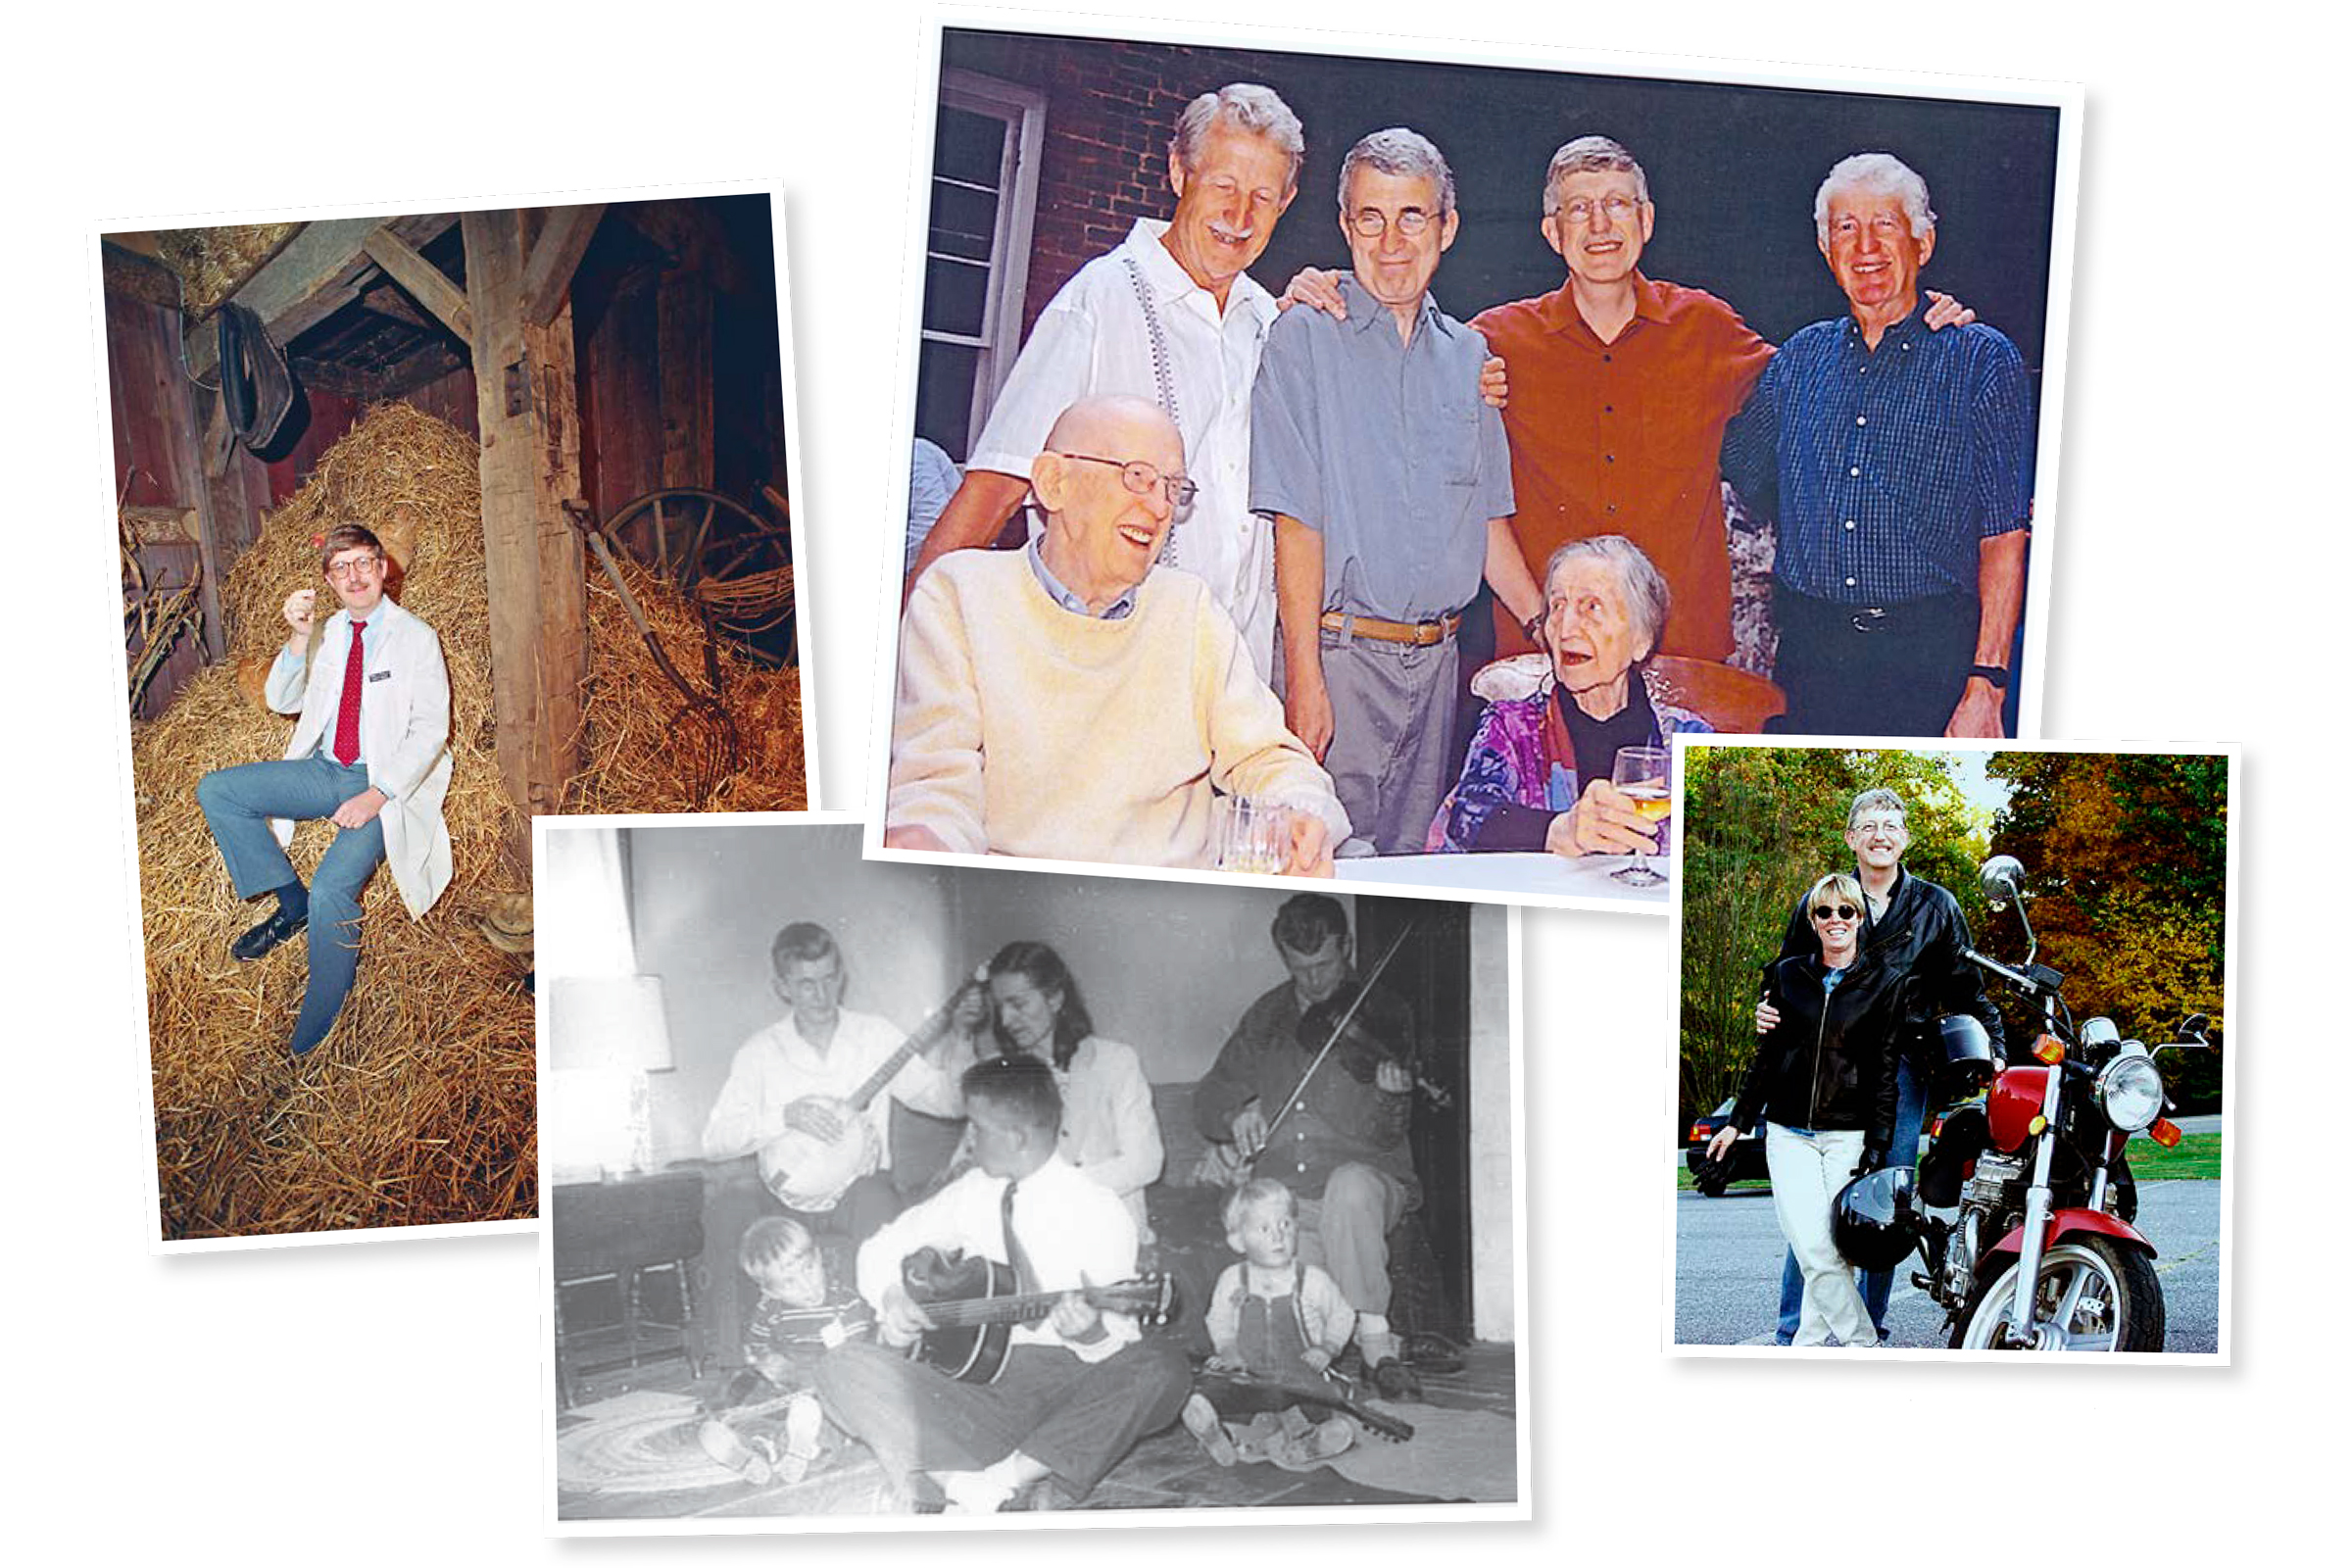 From left: Collins illustrating the challenge of gene hunting in 1989; with family in 1951 and 2003; with his second wife Diane Baker in 2004 (From left: Tom Treuter; Collins Family Collection (2); Eric Green)